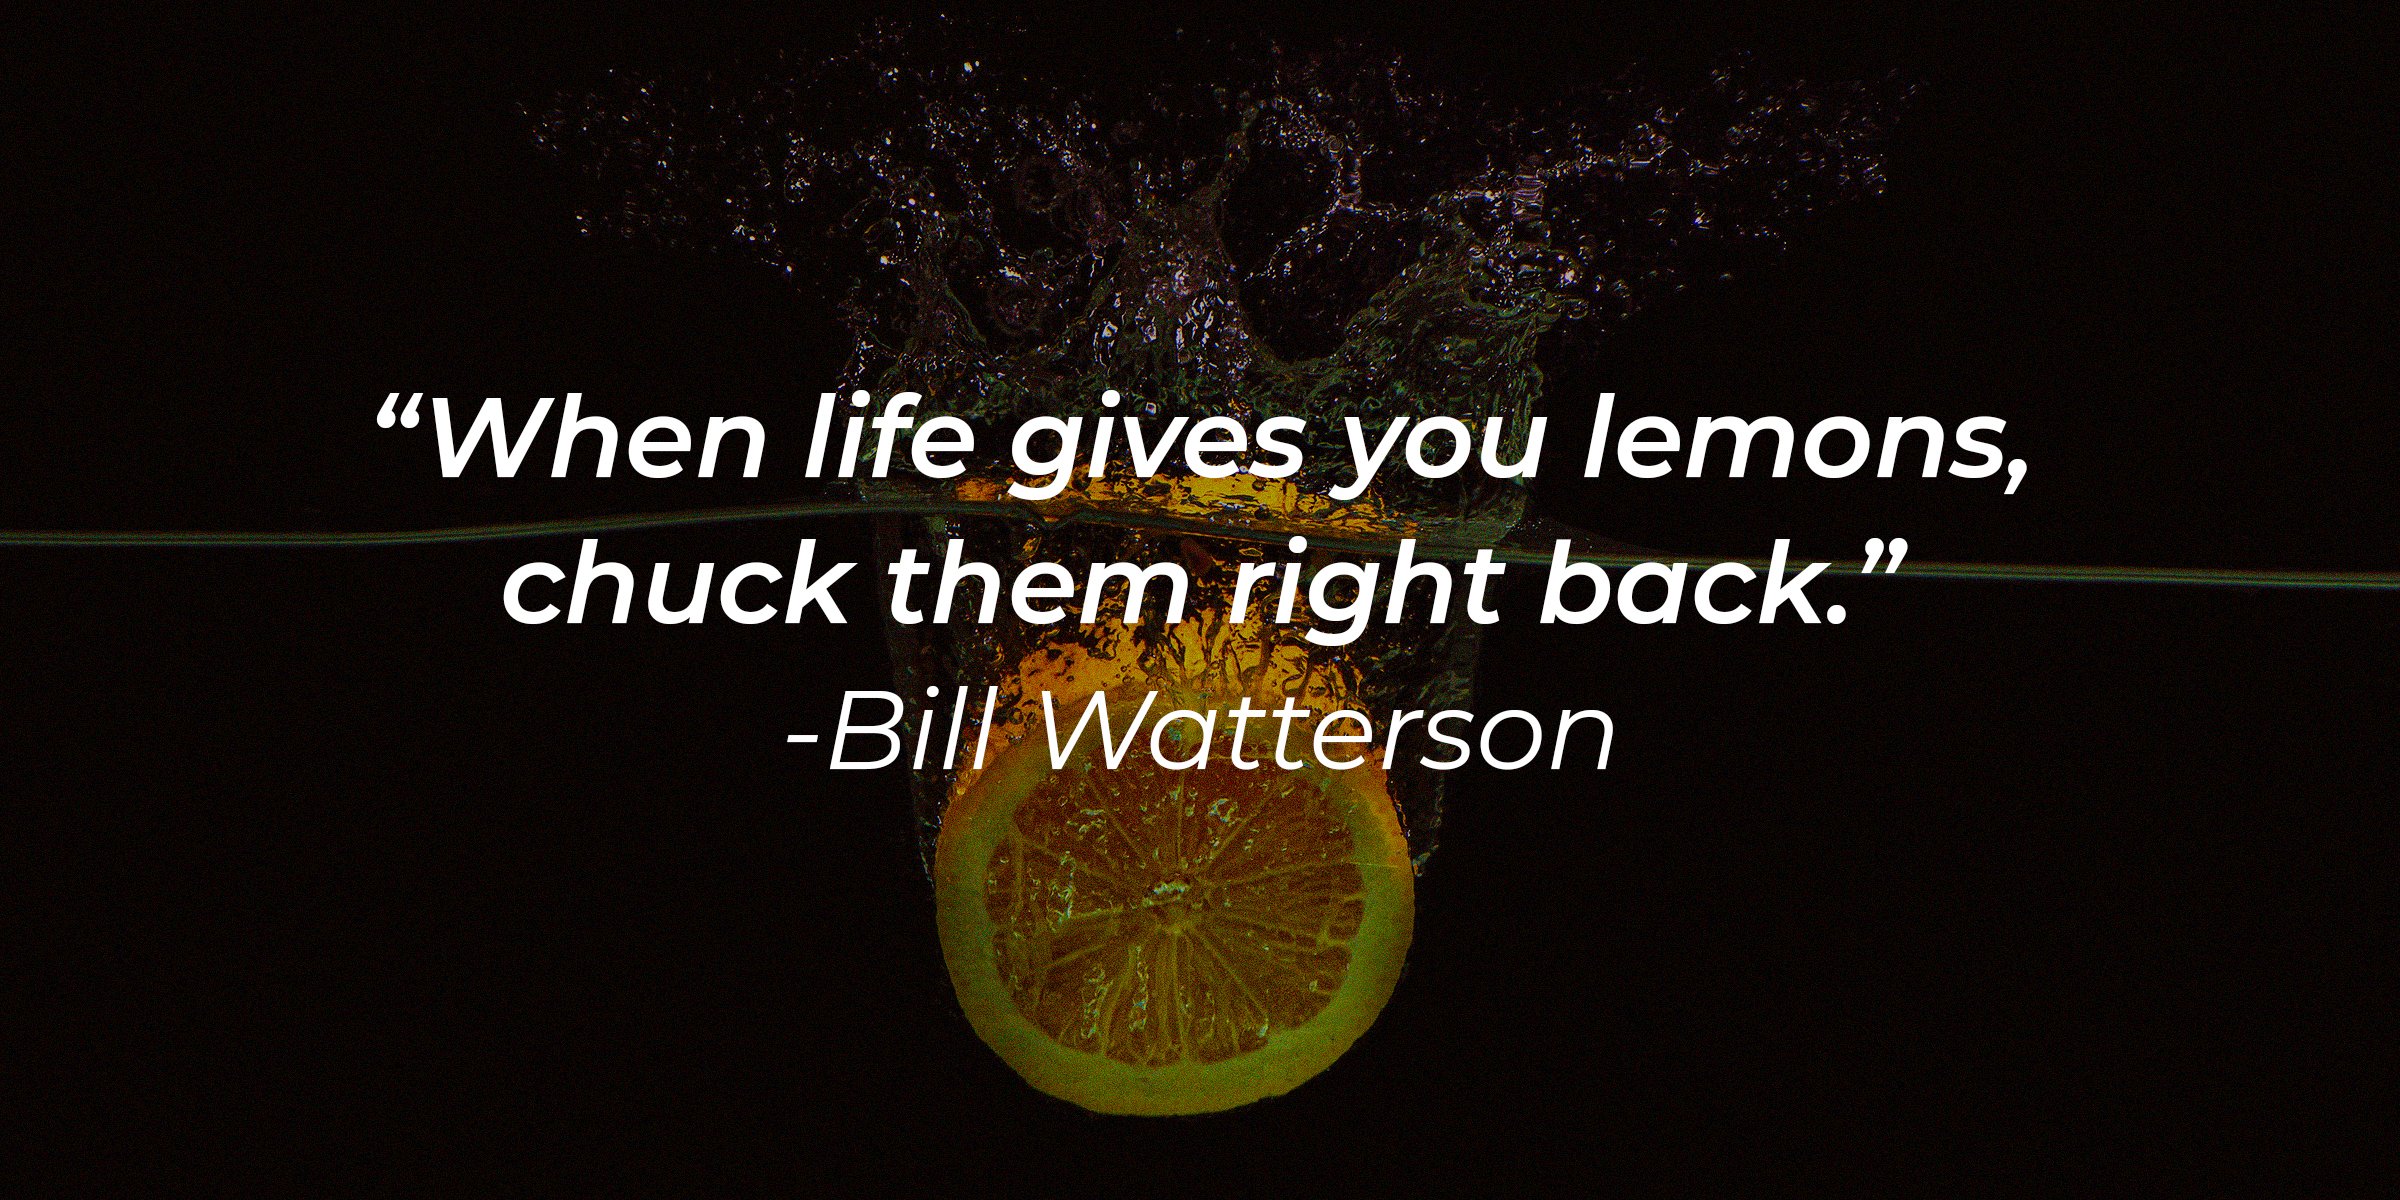 Unsplash  | A picture of a lemon with the quote, "When life gives you lemons, chuck them right back."